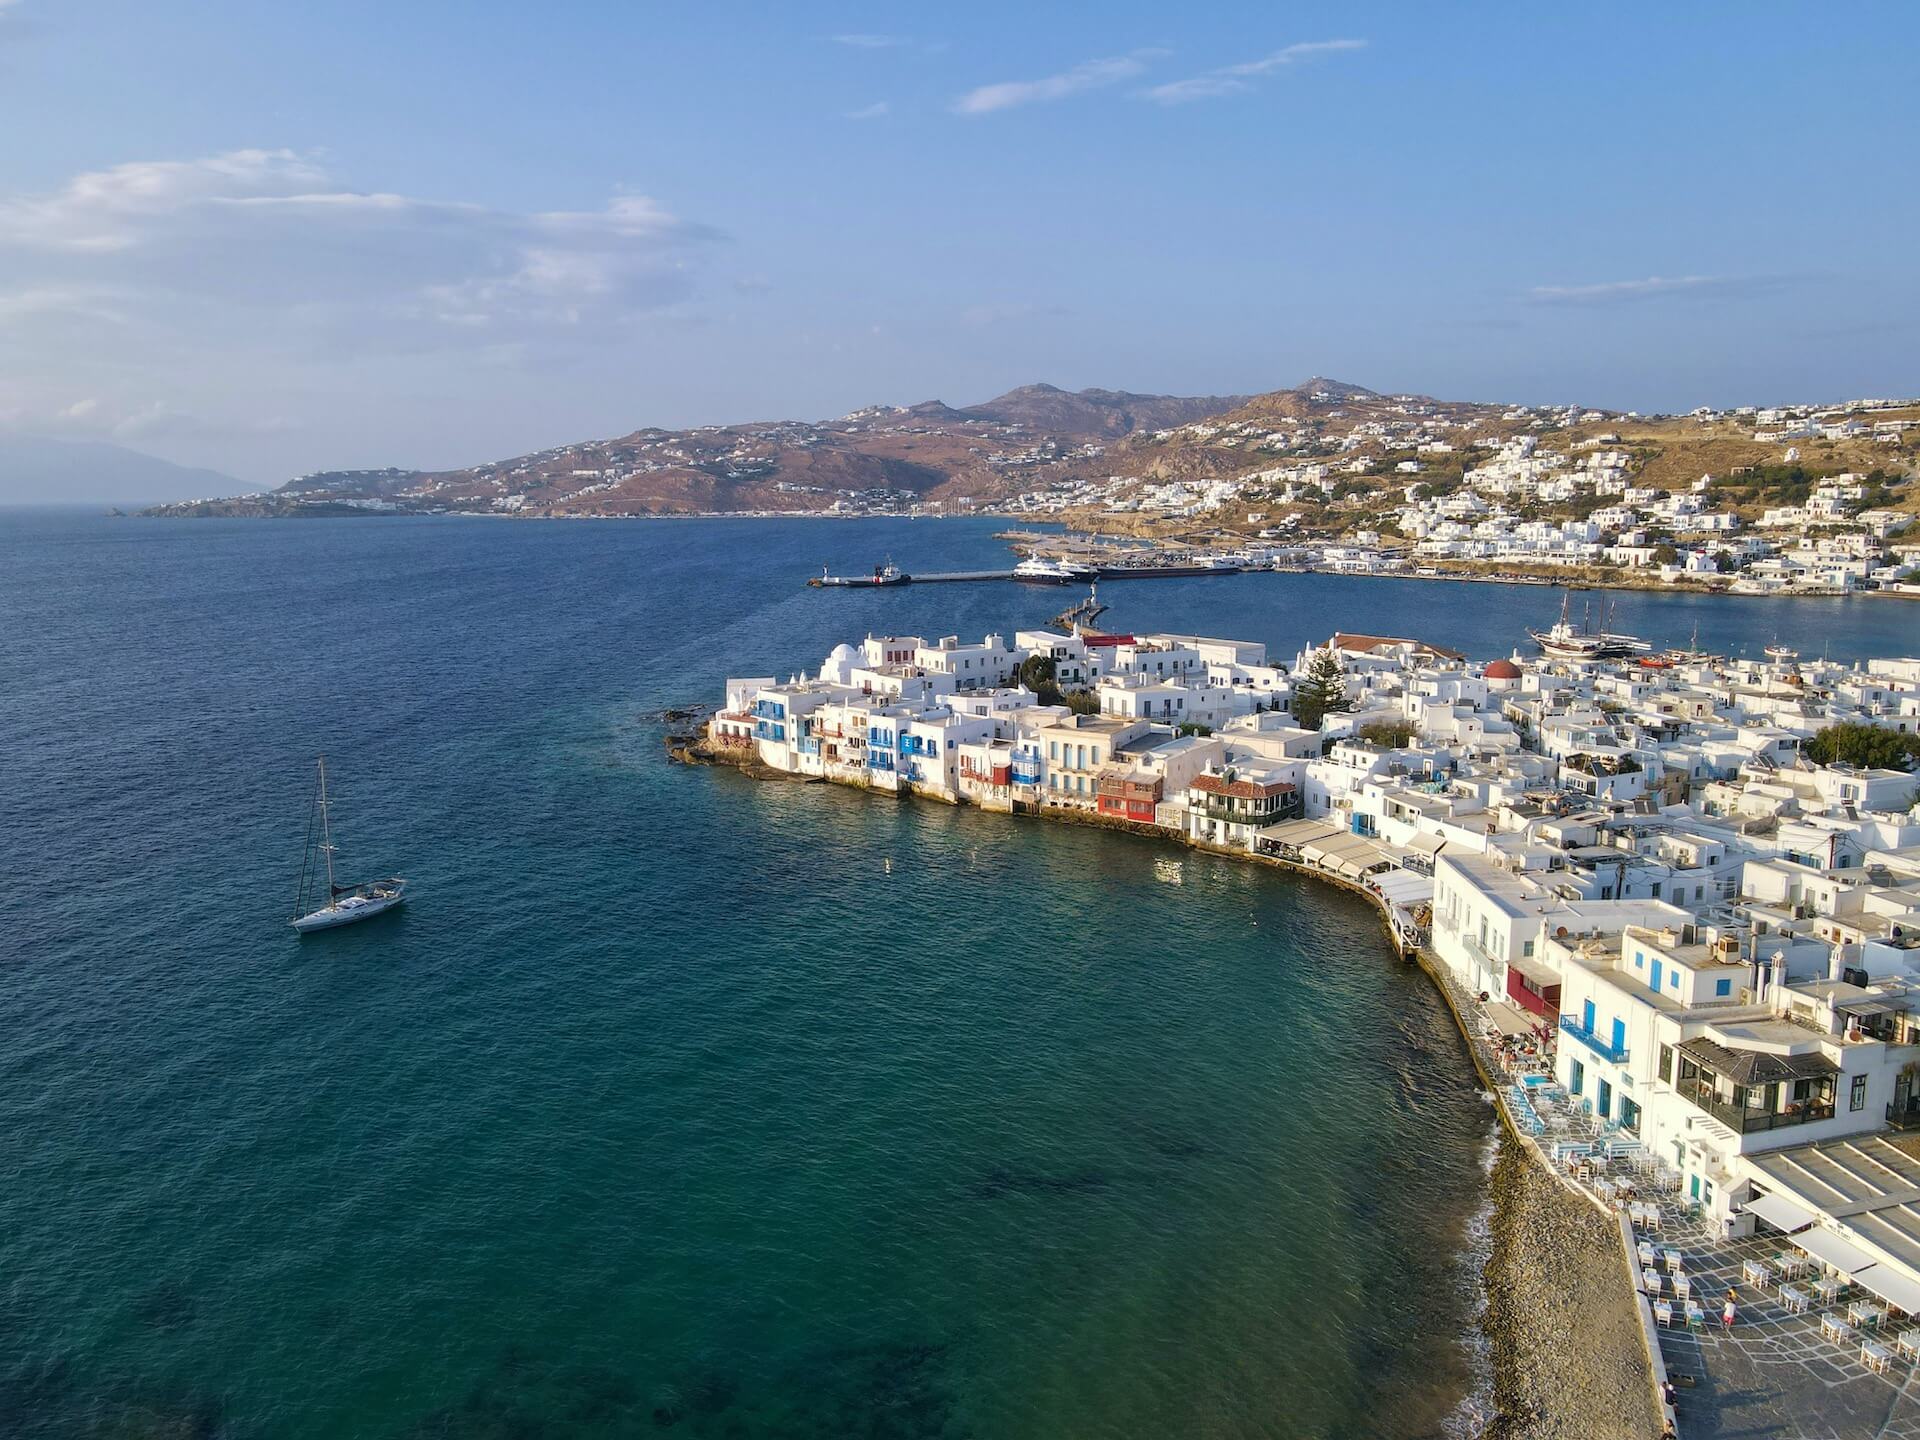 View of Mykonos from above